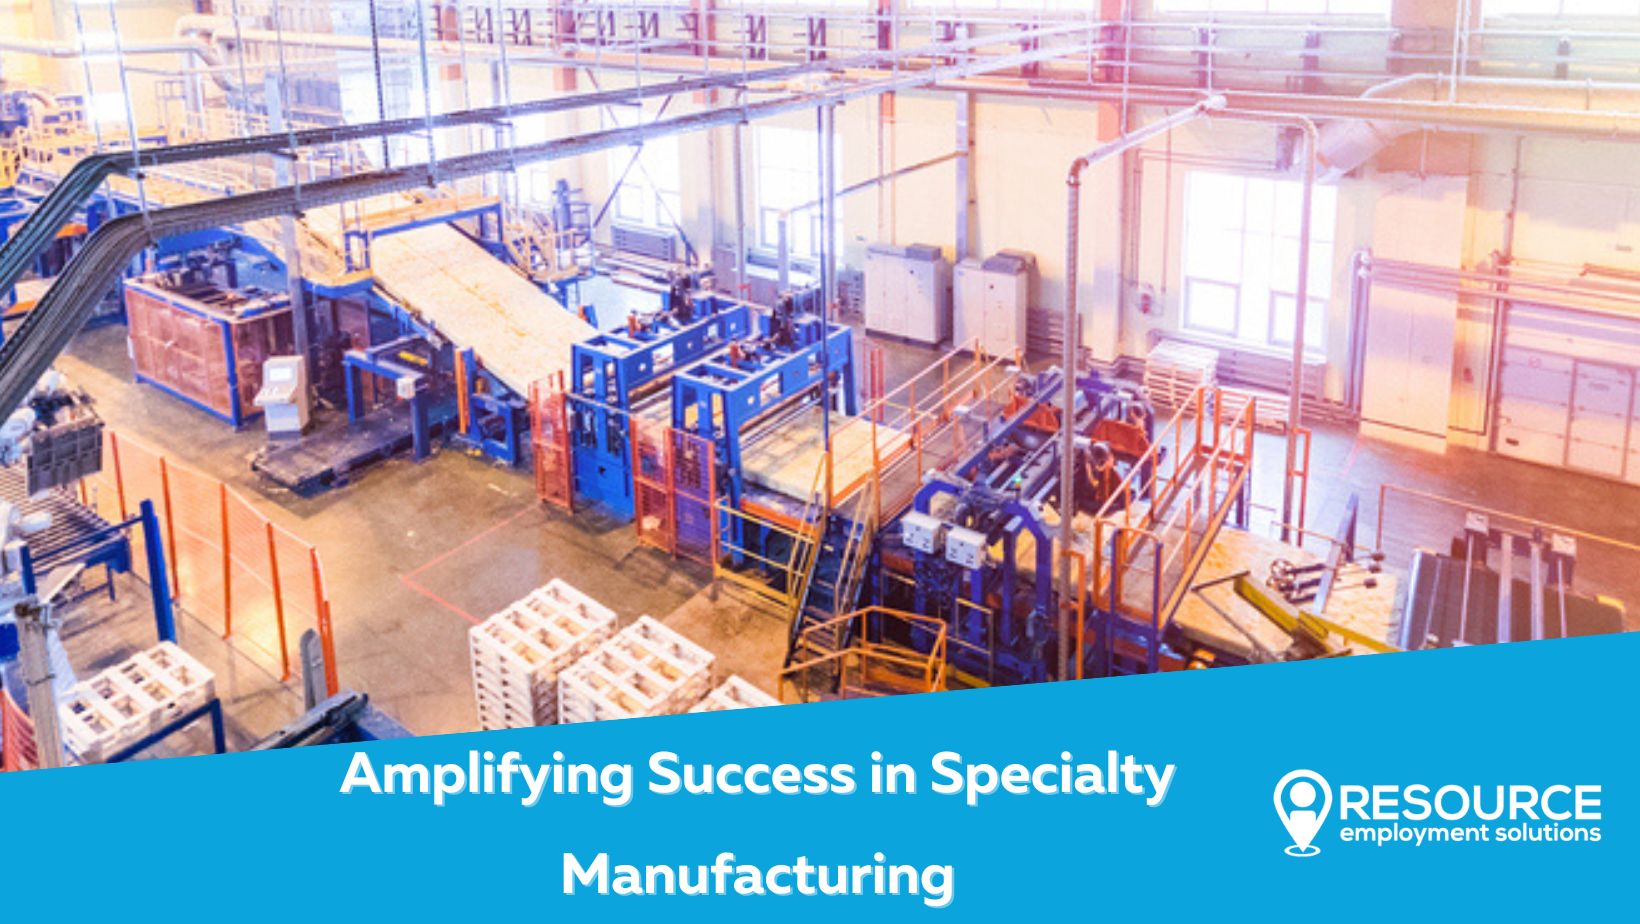 Amplifying Success in Specialty Manufacturing: Leveraging Human Capital with Resource Employment Sol